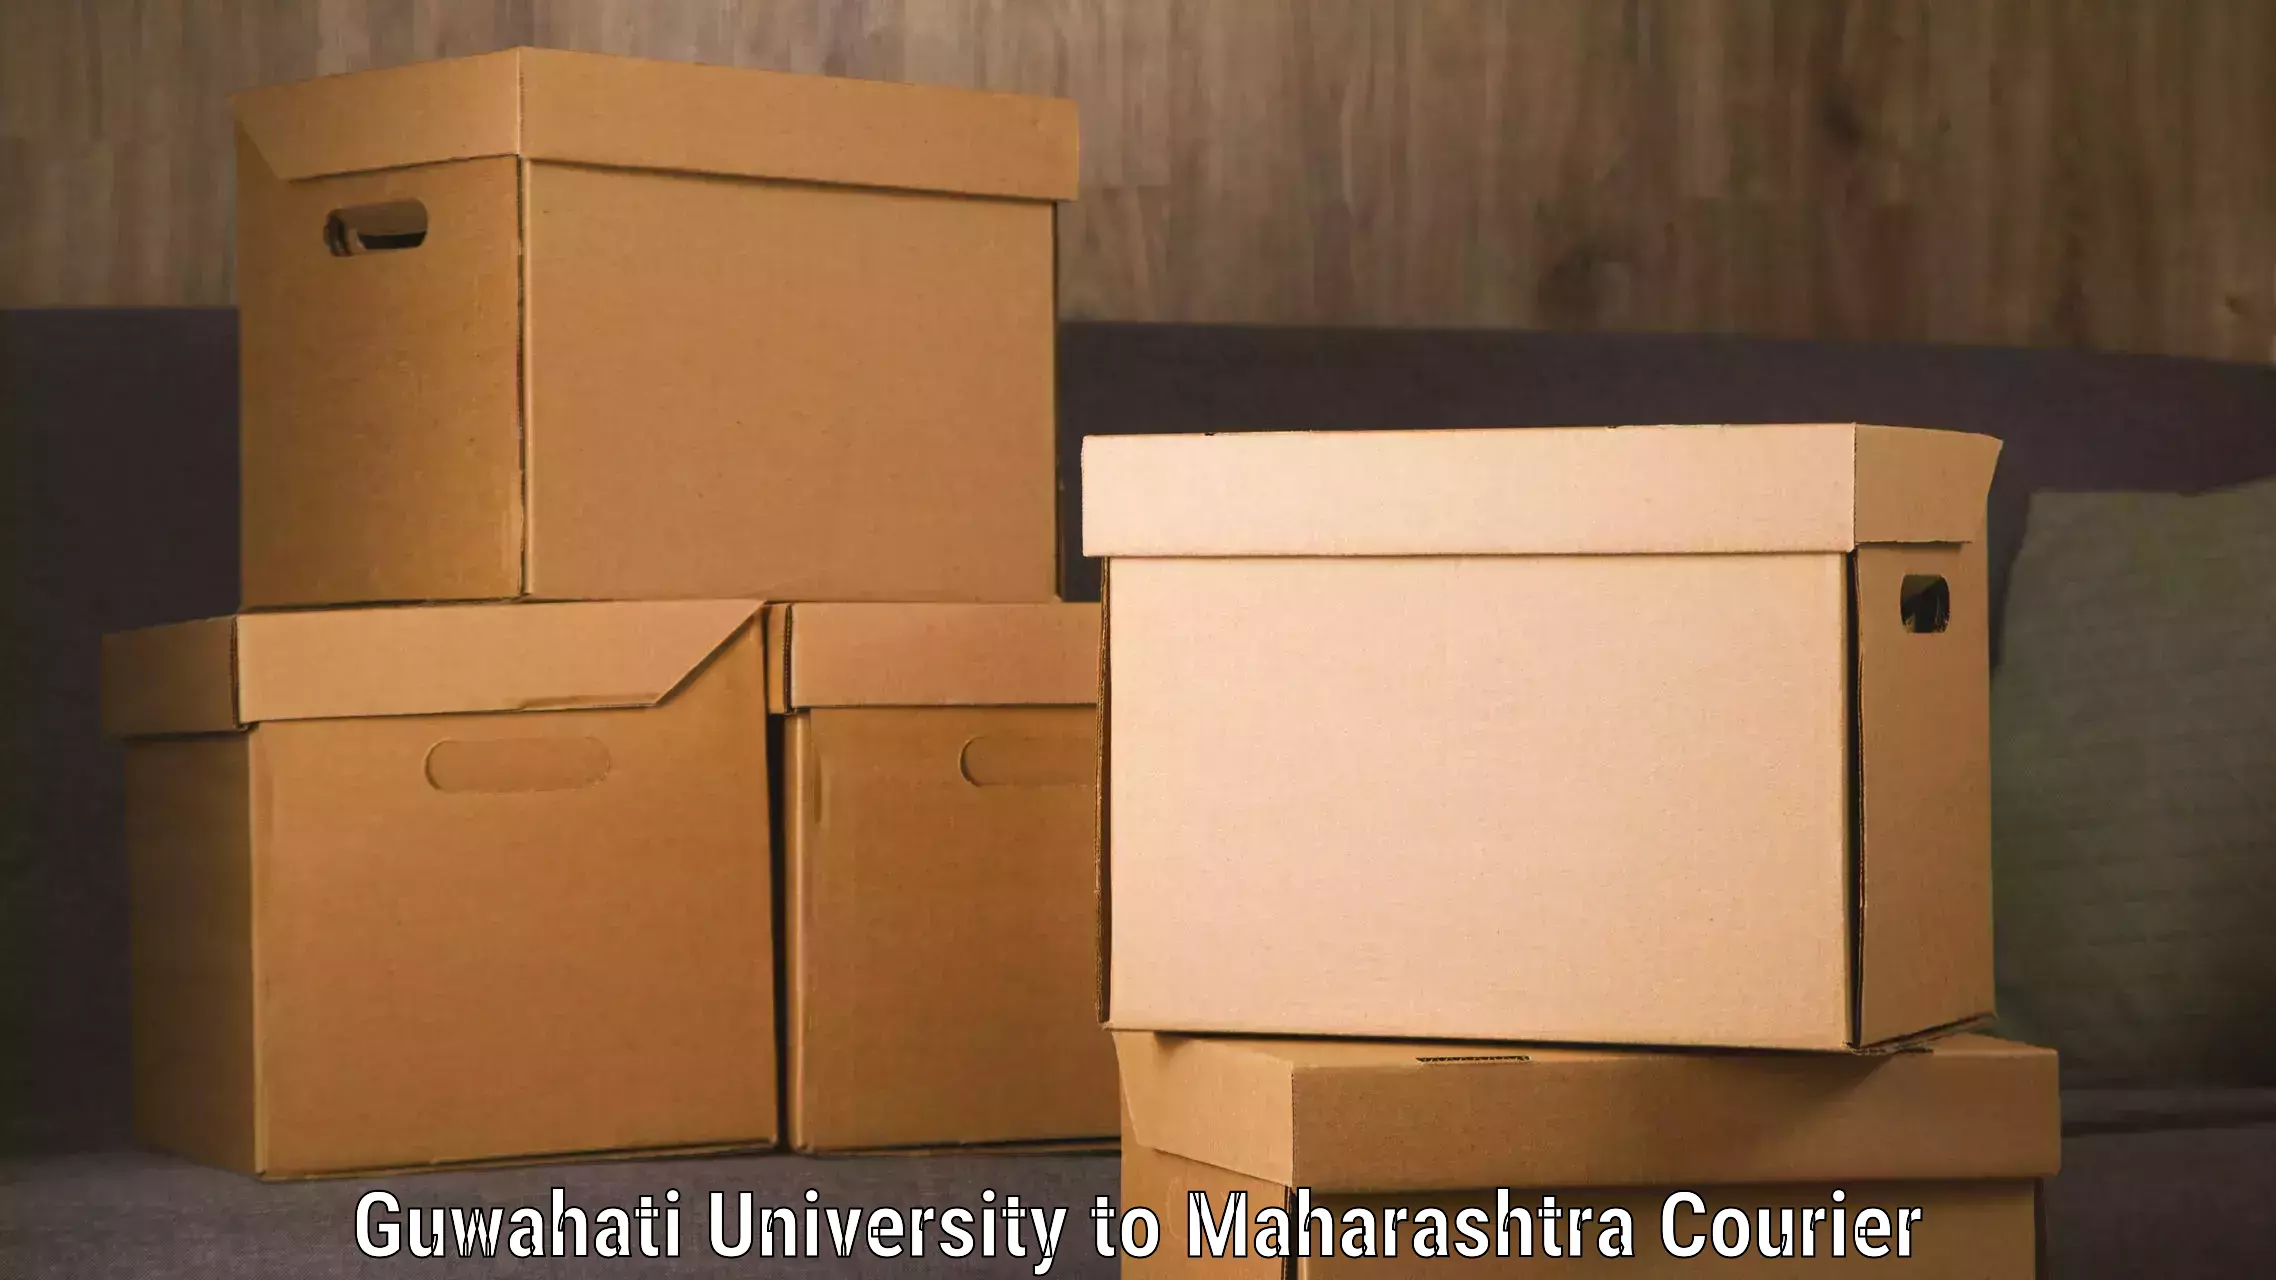 Luggage courier network Guwahati University to Thane